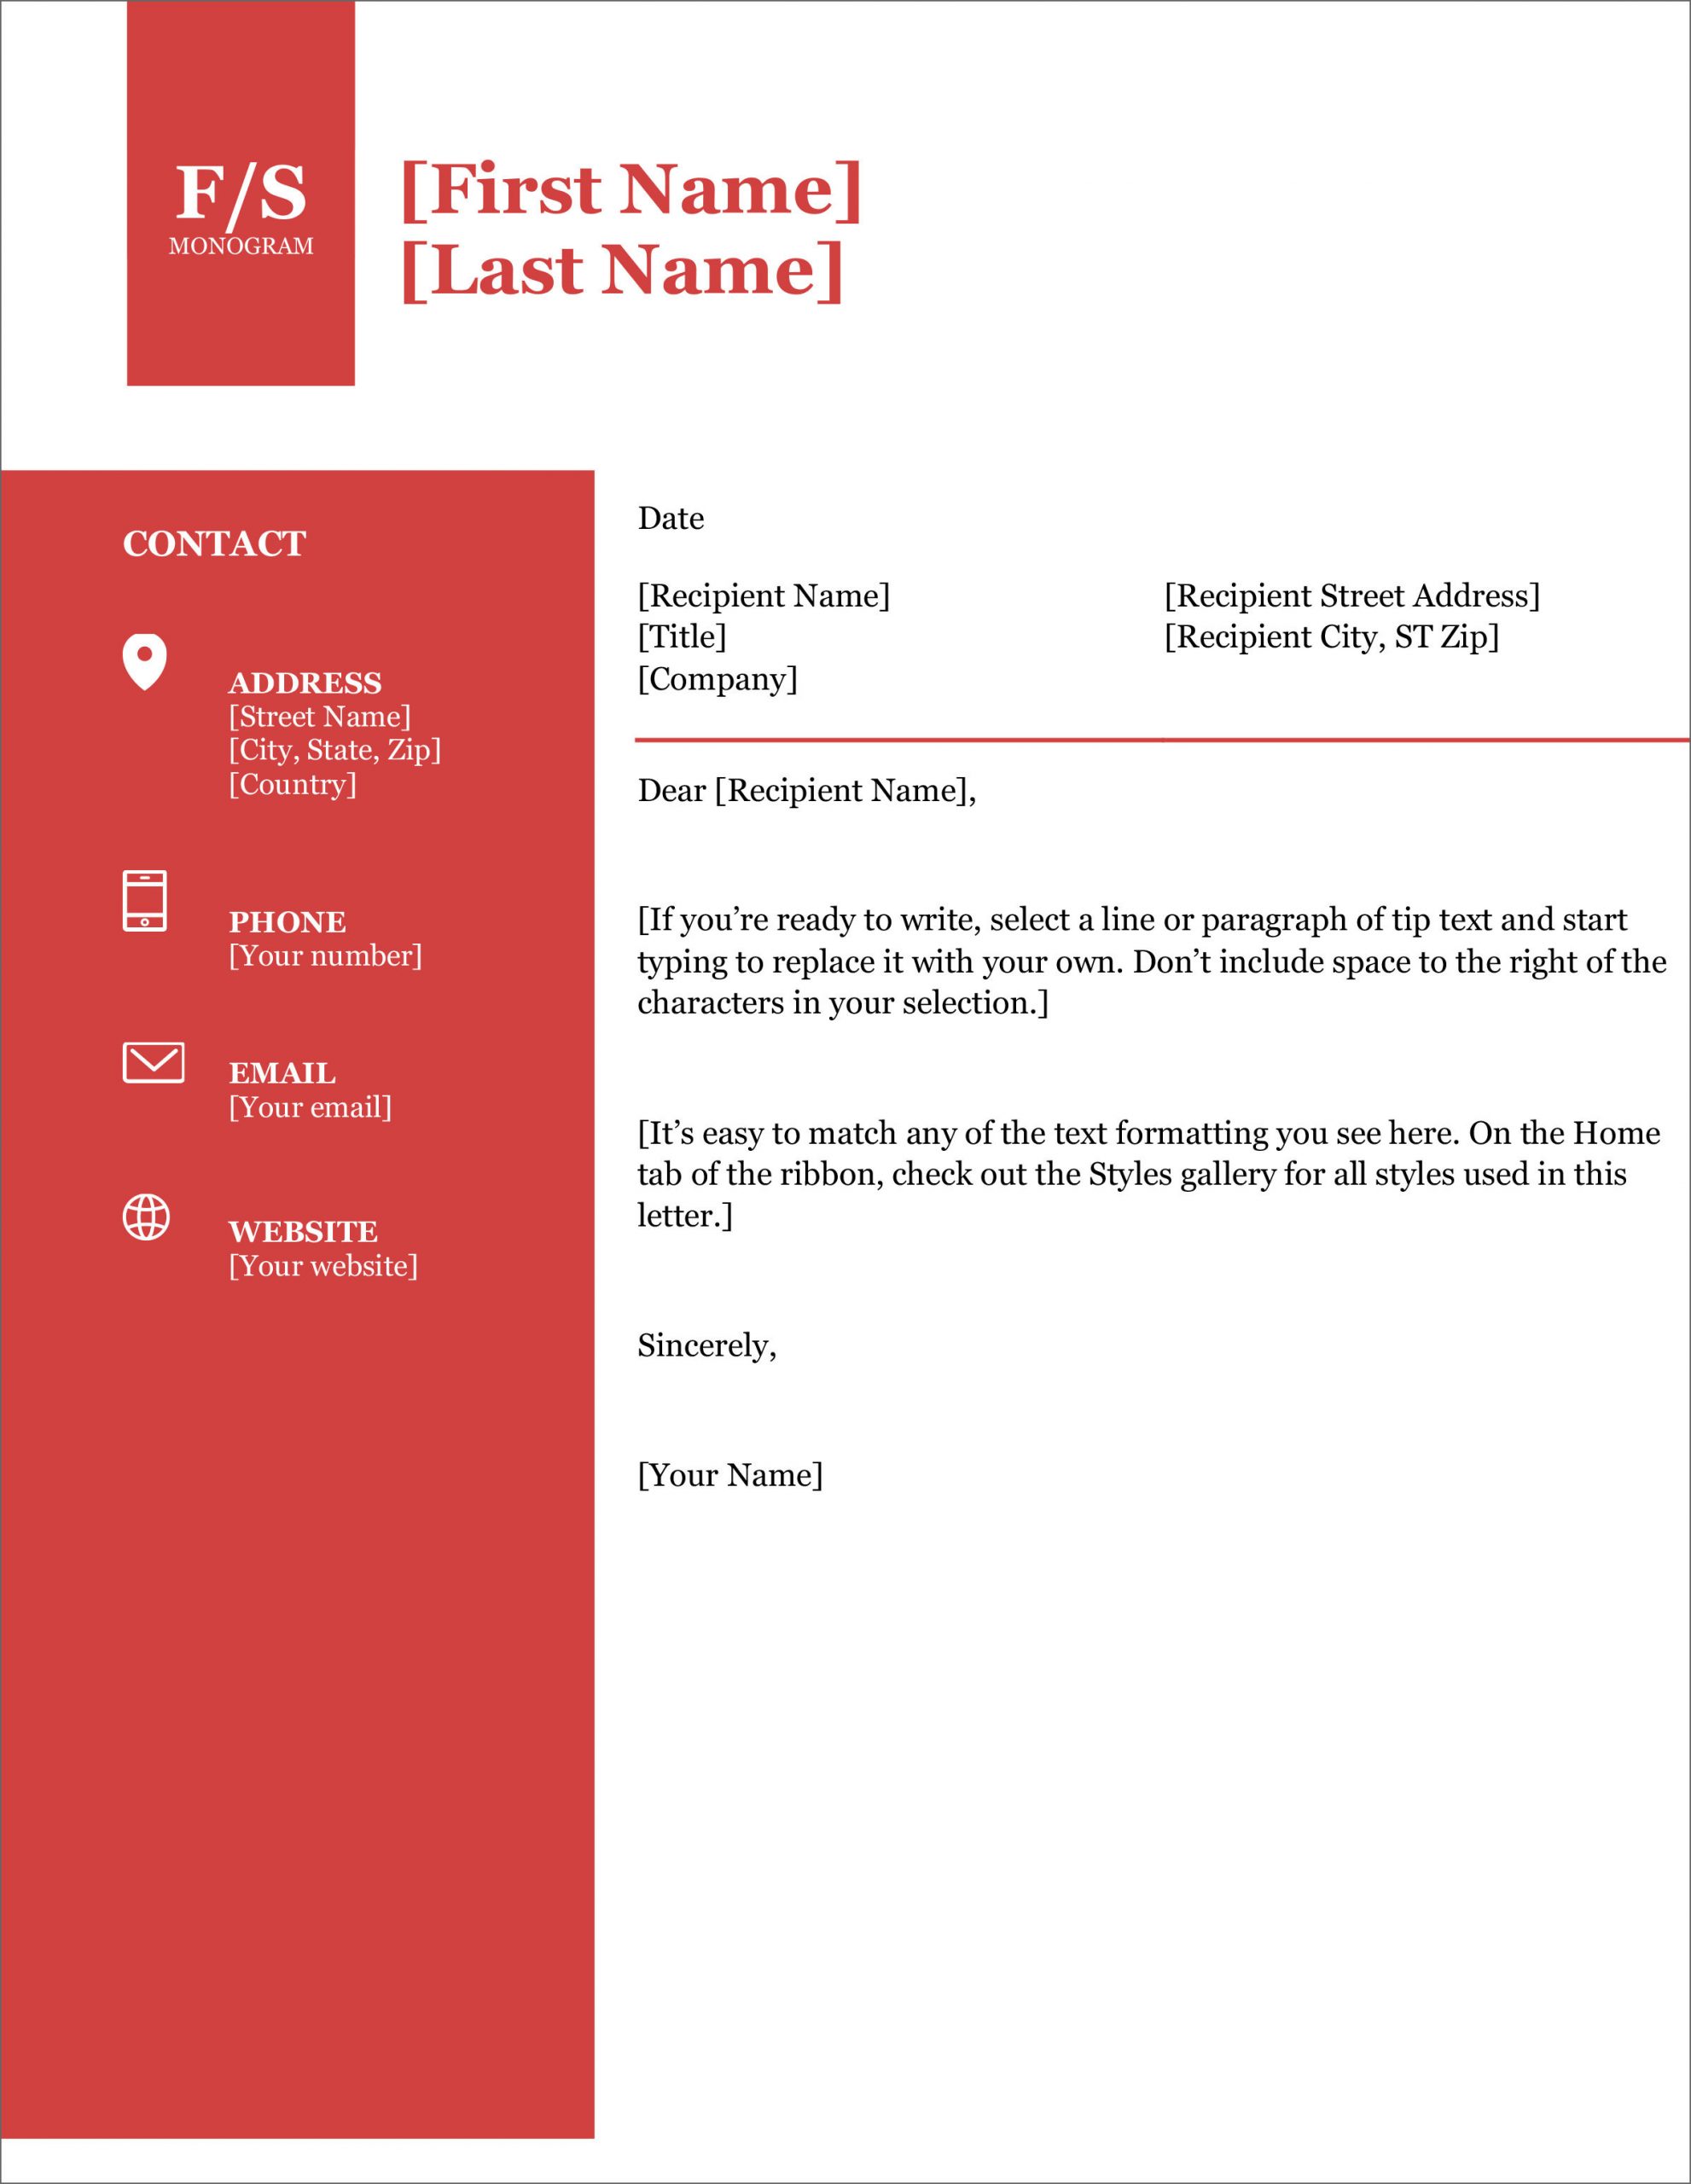 Sample Cover Letter for Resume Microsoft Word 13 Free Cover Letter Templates for Microsoft Word Docx and Google Docs